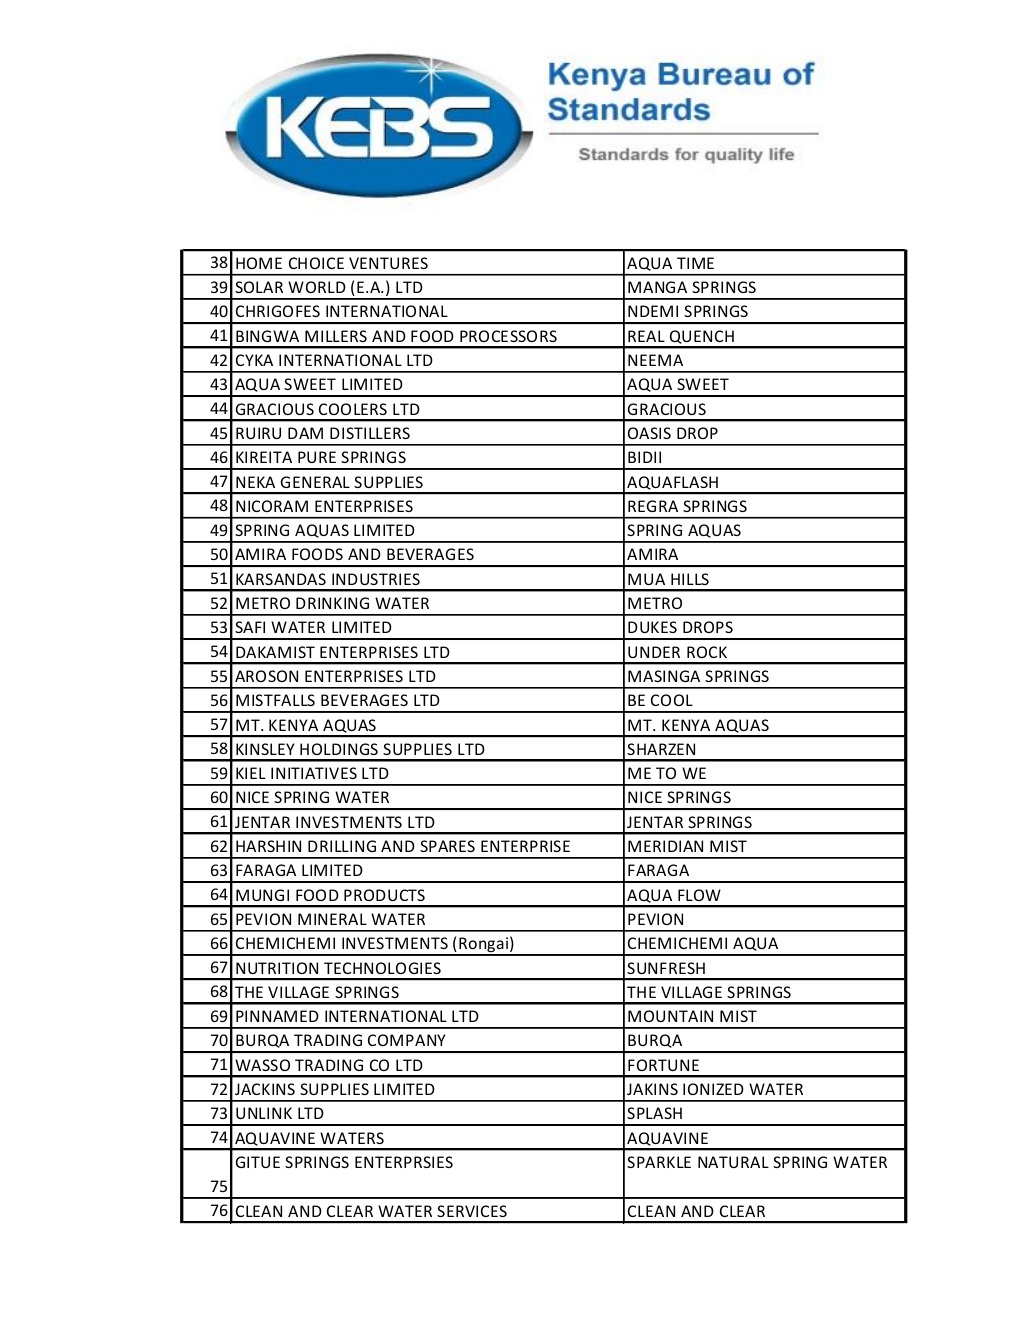 list-of-368-water-brands-banned-by-kebs-2-1024